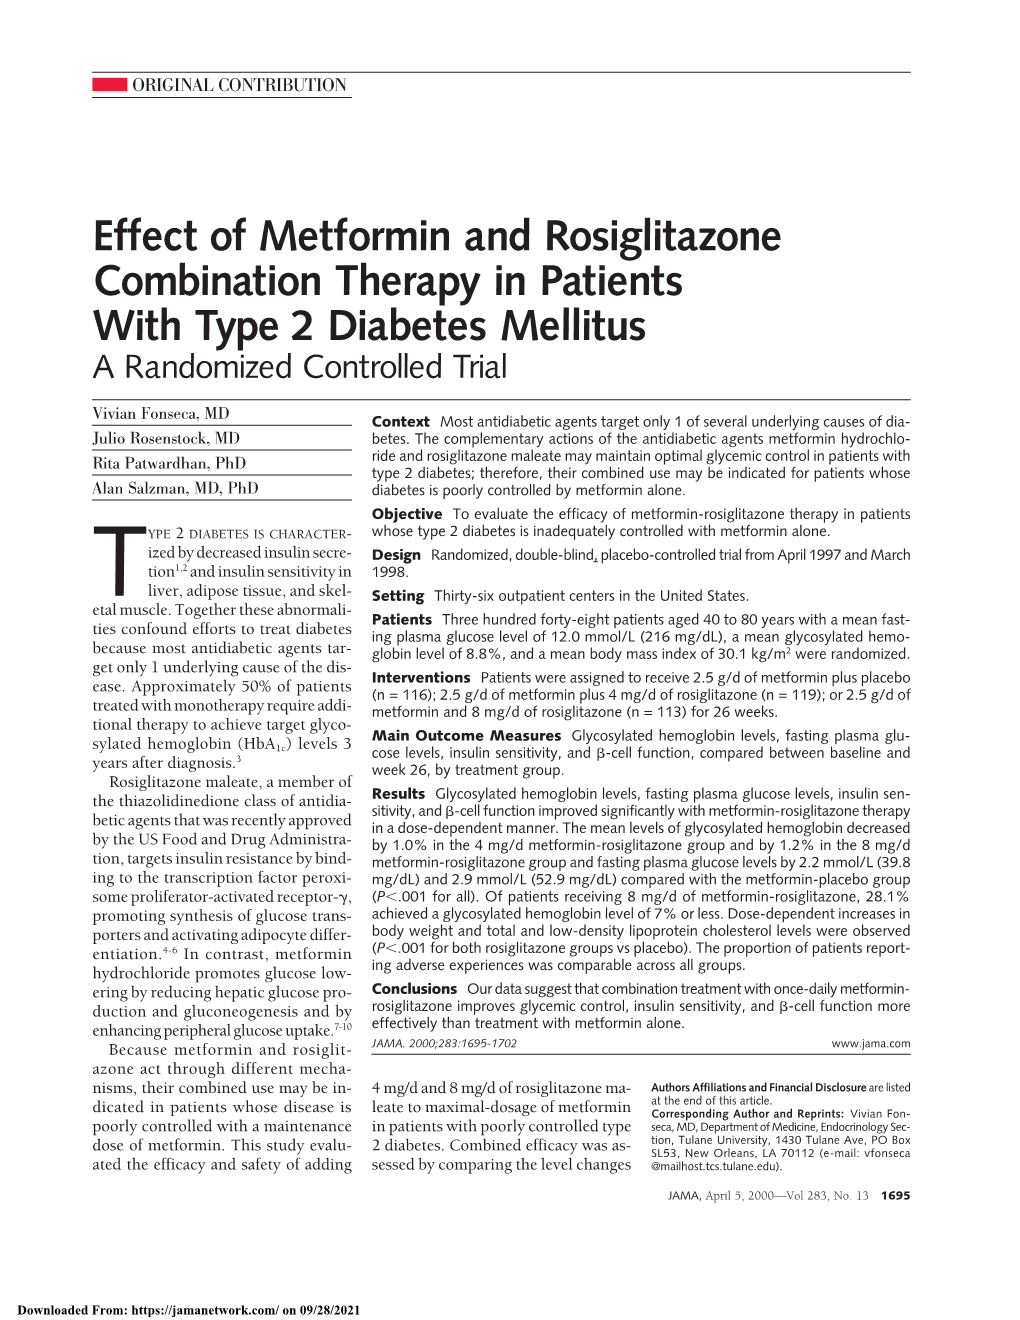 Effect of Metformin and Rosiglitazone Combination Therapy in Patients with Type 2 Diabetes Mellitus a Randomized Controlled Trial